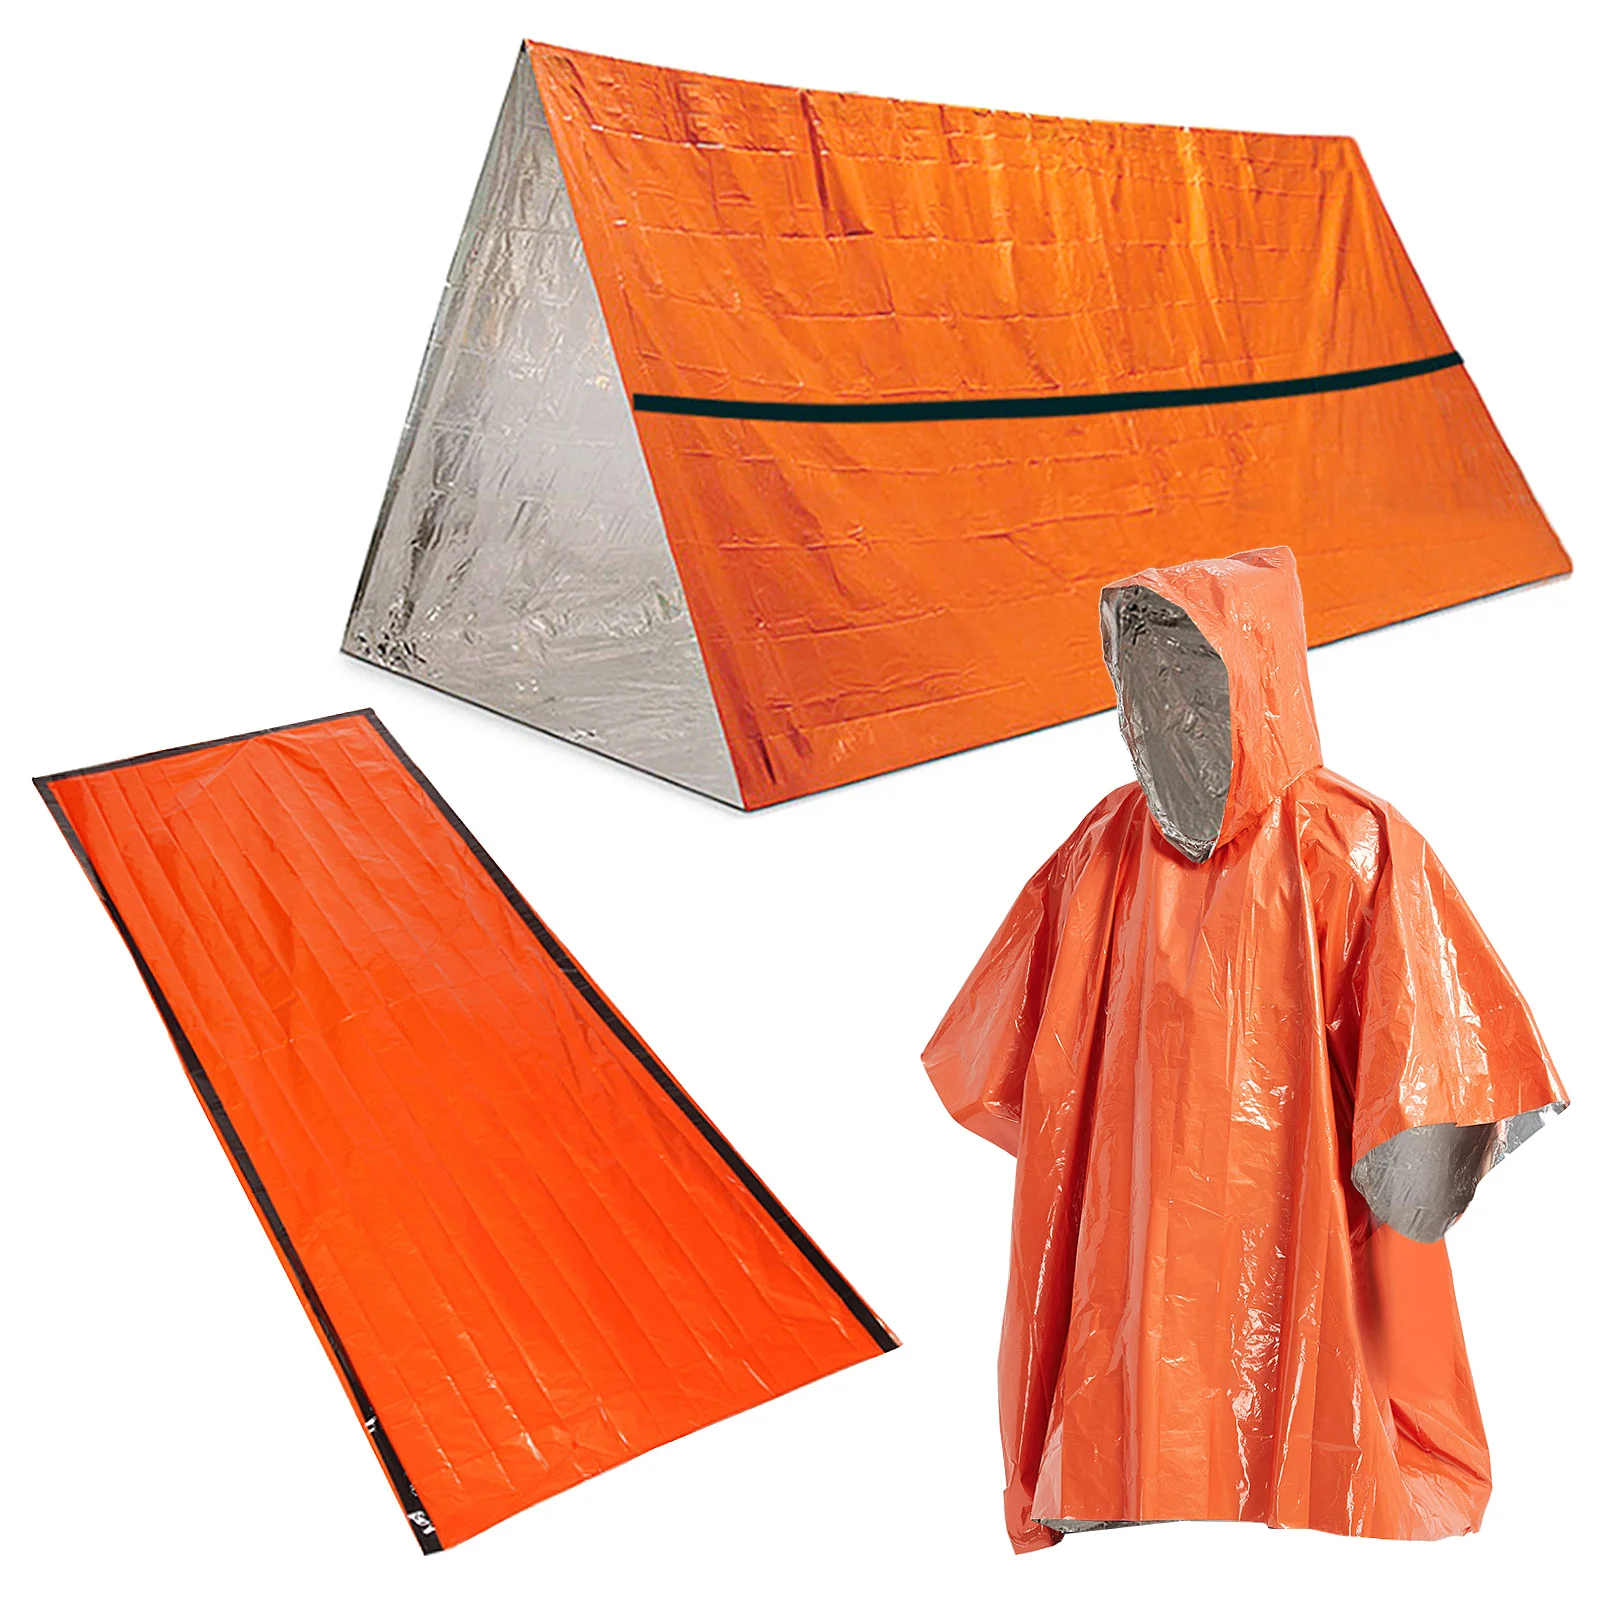 

Outdoor Waterproof Emergency Survival Tent Shelter with Sleeping Bag for Camping Hiking Adventure Emergency Survival Tent